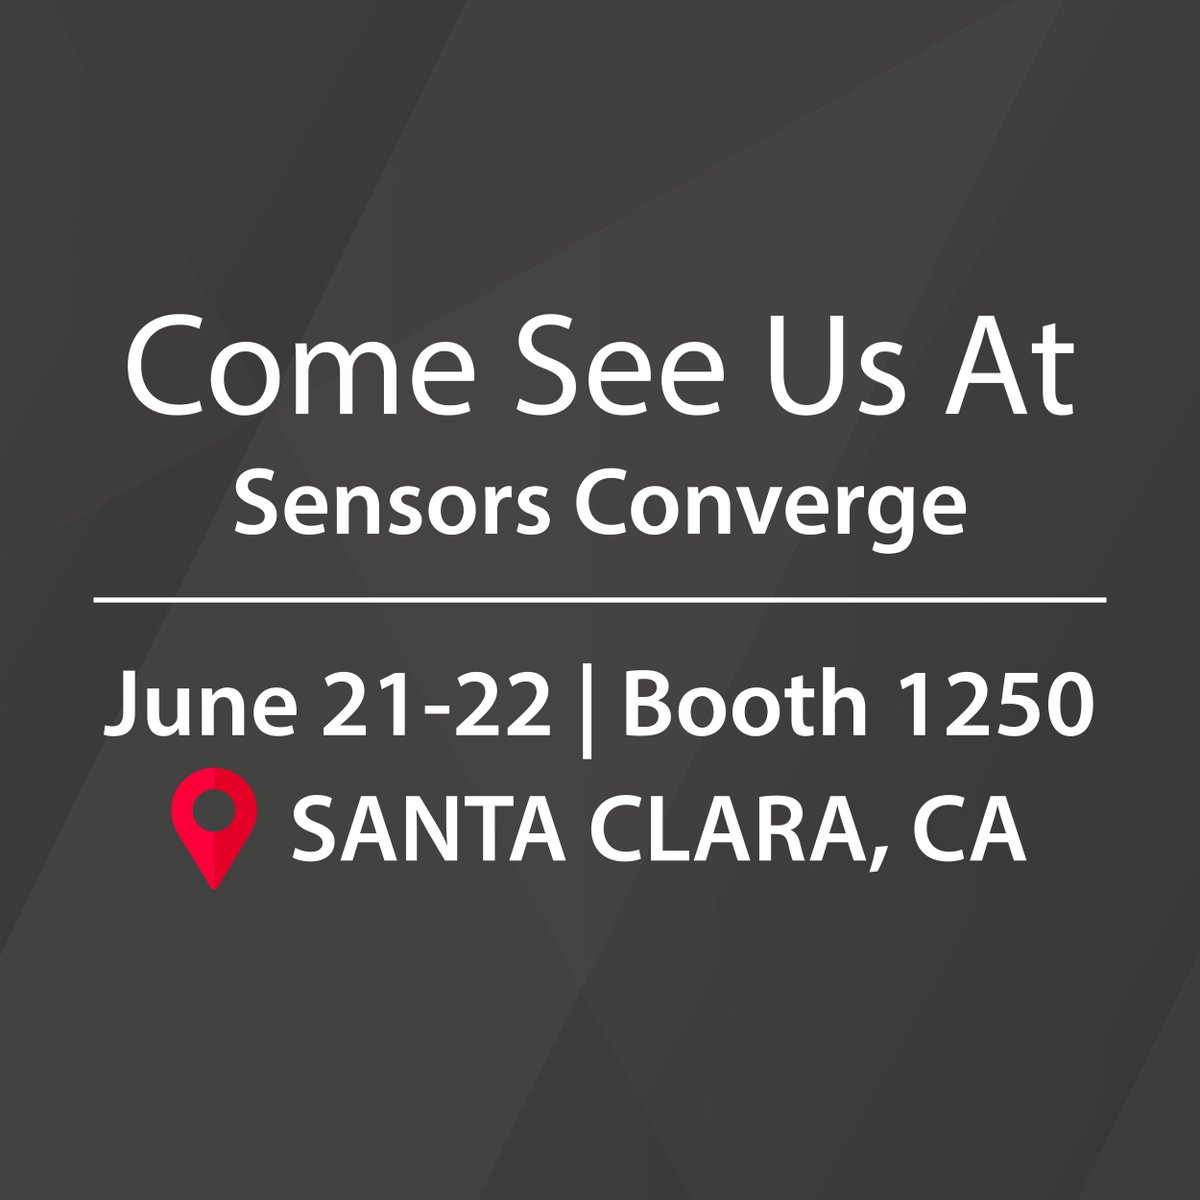 AMETEK MOCON and Alphasense’s industry-leading sensors are trusted by OEM manufacturers worldwide. Learn why at @SensorsConverge, where our experts will be on hand to answer any questions. 🙋

#SensorsConverge #GasSafety #SensorTechnology